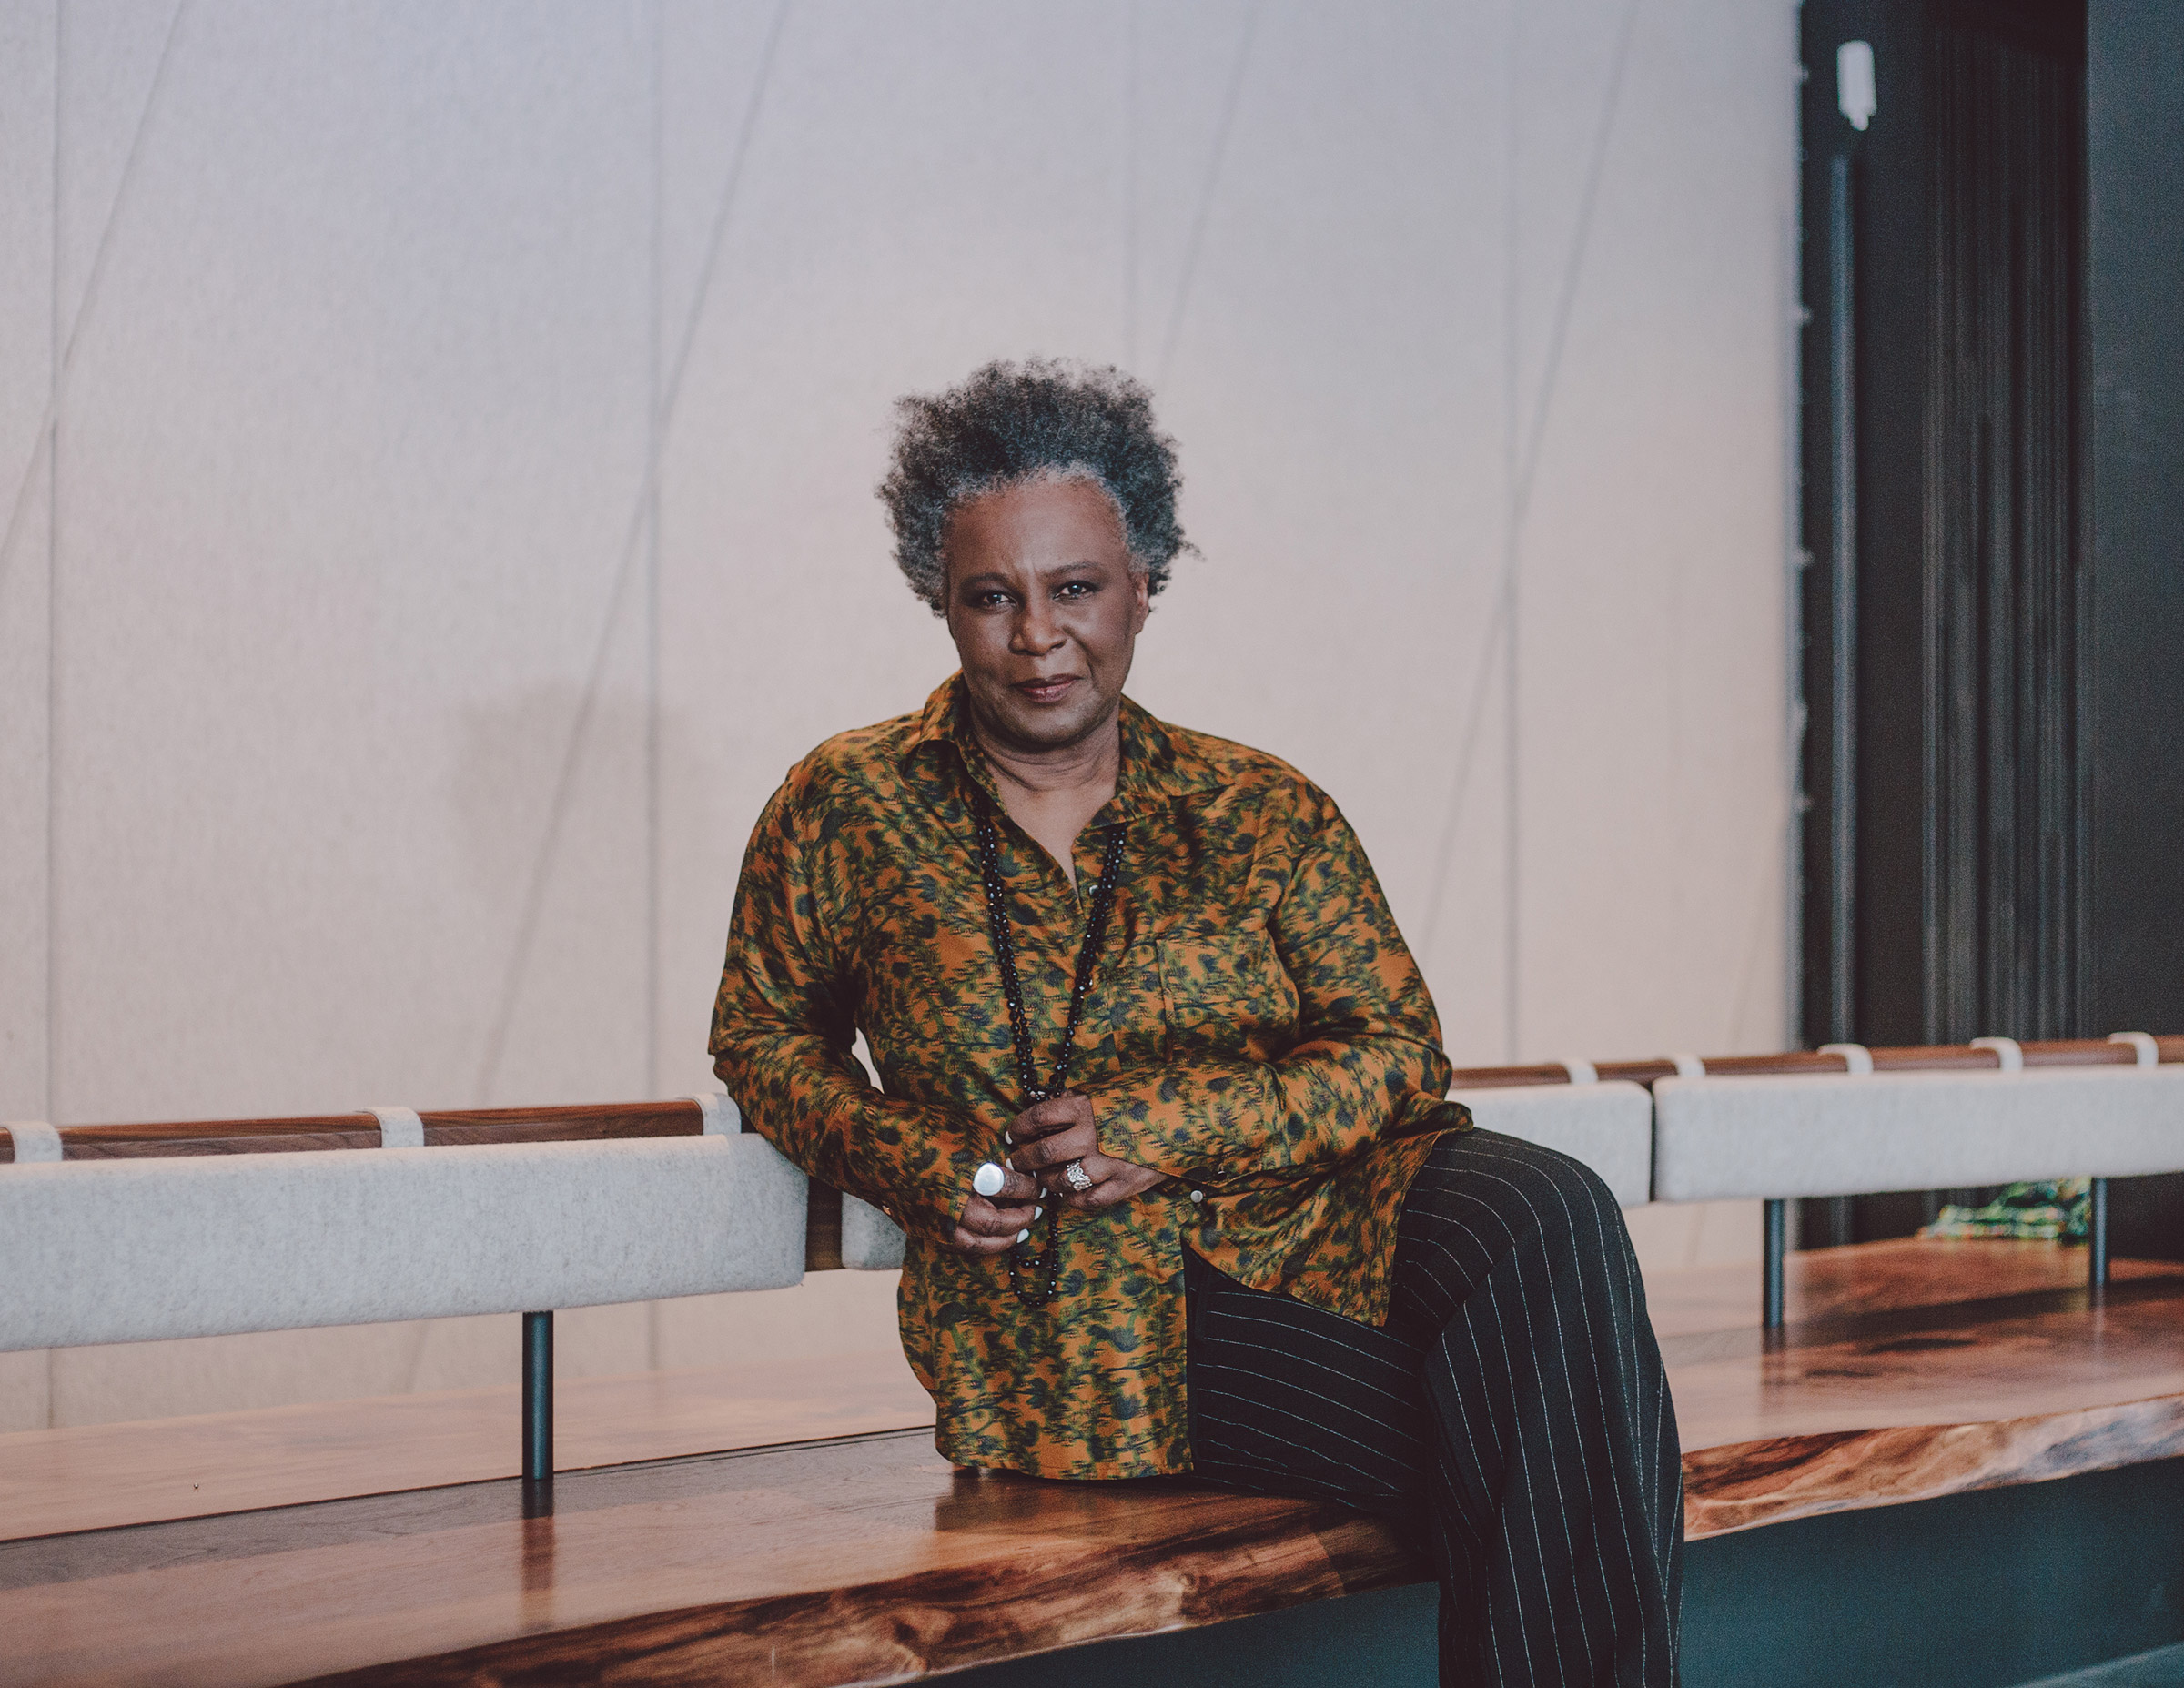 Claudia Rankine poses for a portrait at The Shed